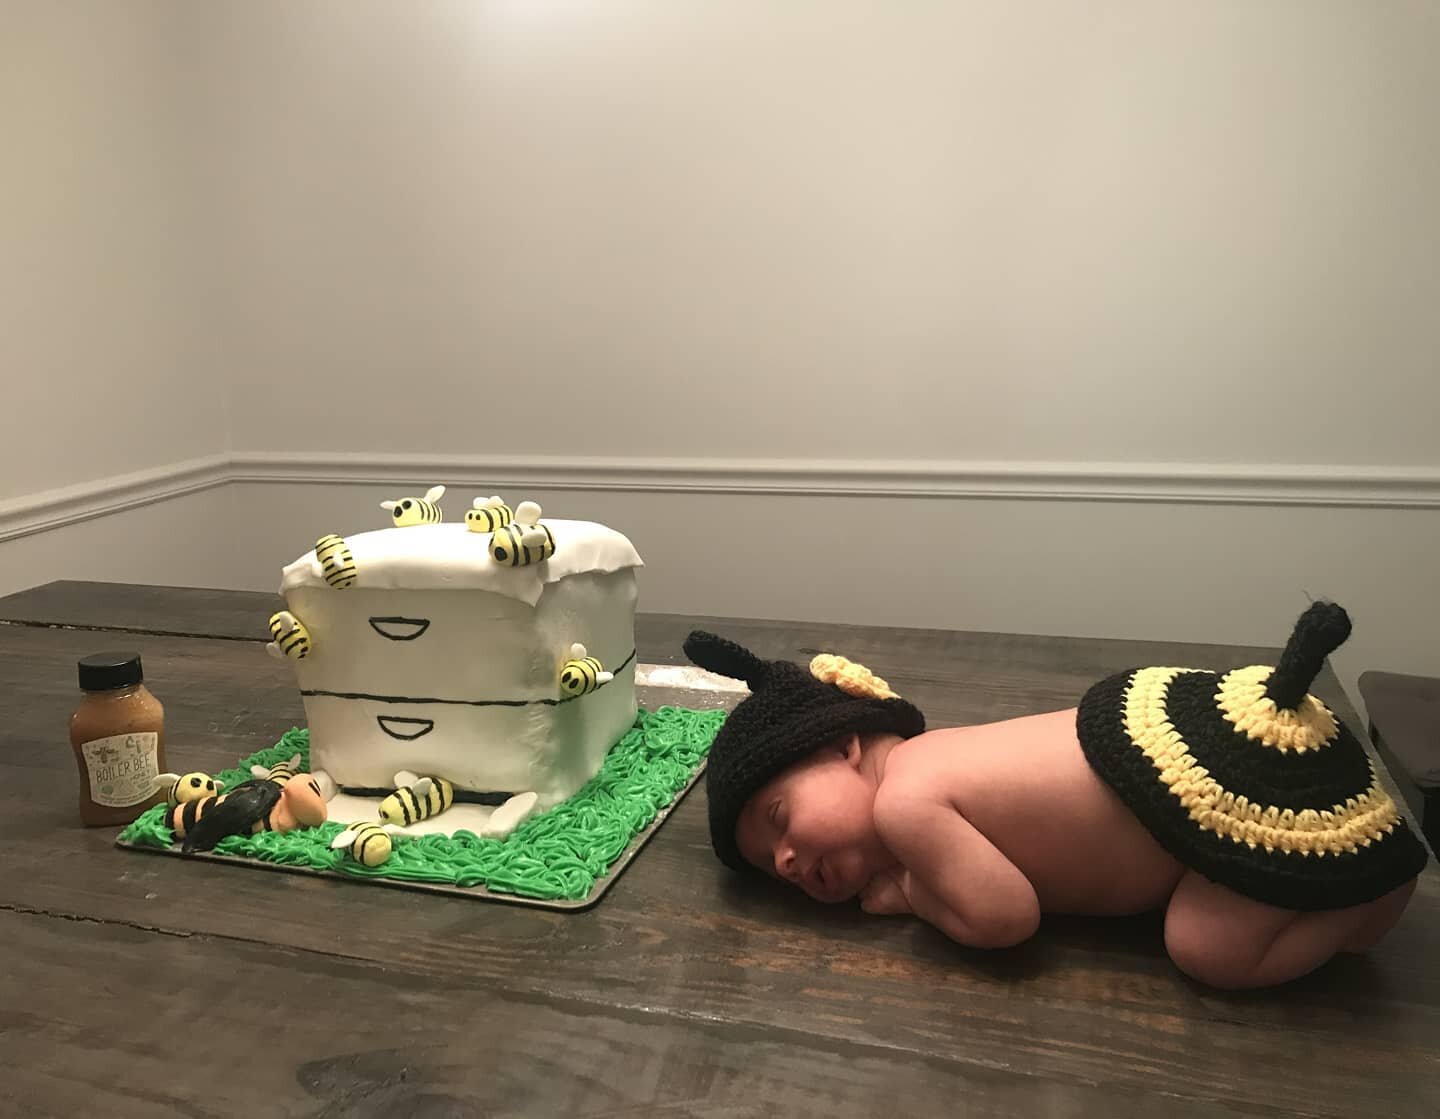 Second Bake off contender: Everyone is worried about invasive hornets, but look at the size of this infant-bee! Here we have a rustic honey cake in the shape of a honey bee colony. 

#HarpurLabBakeOff #boilerbeehoney #purdue #adorable